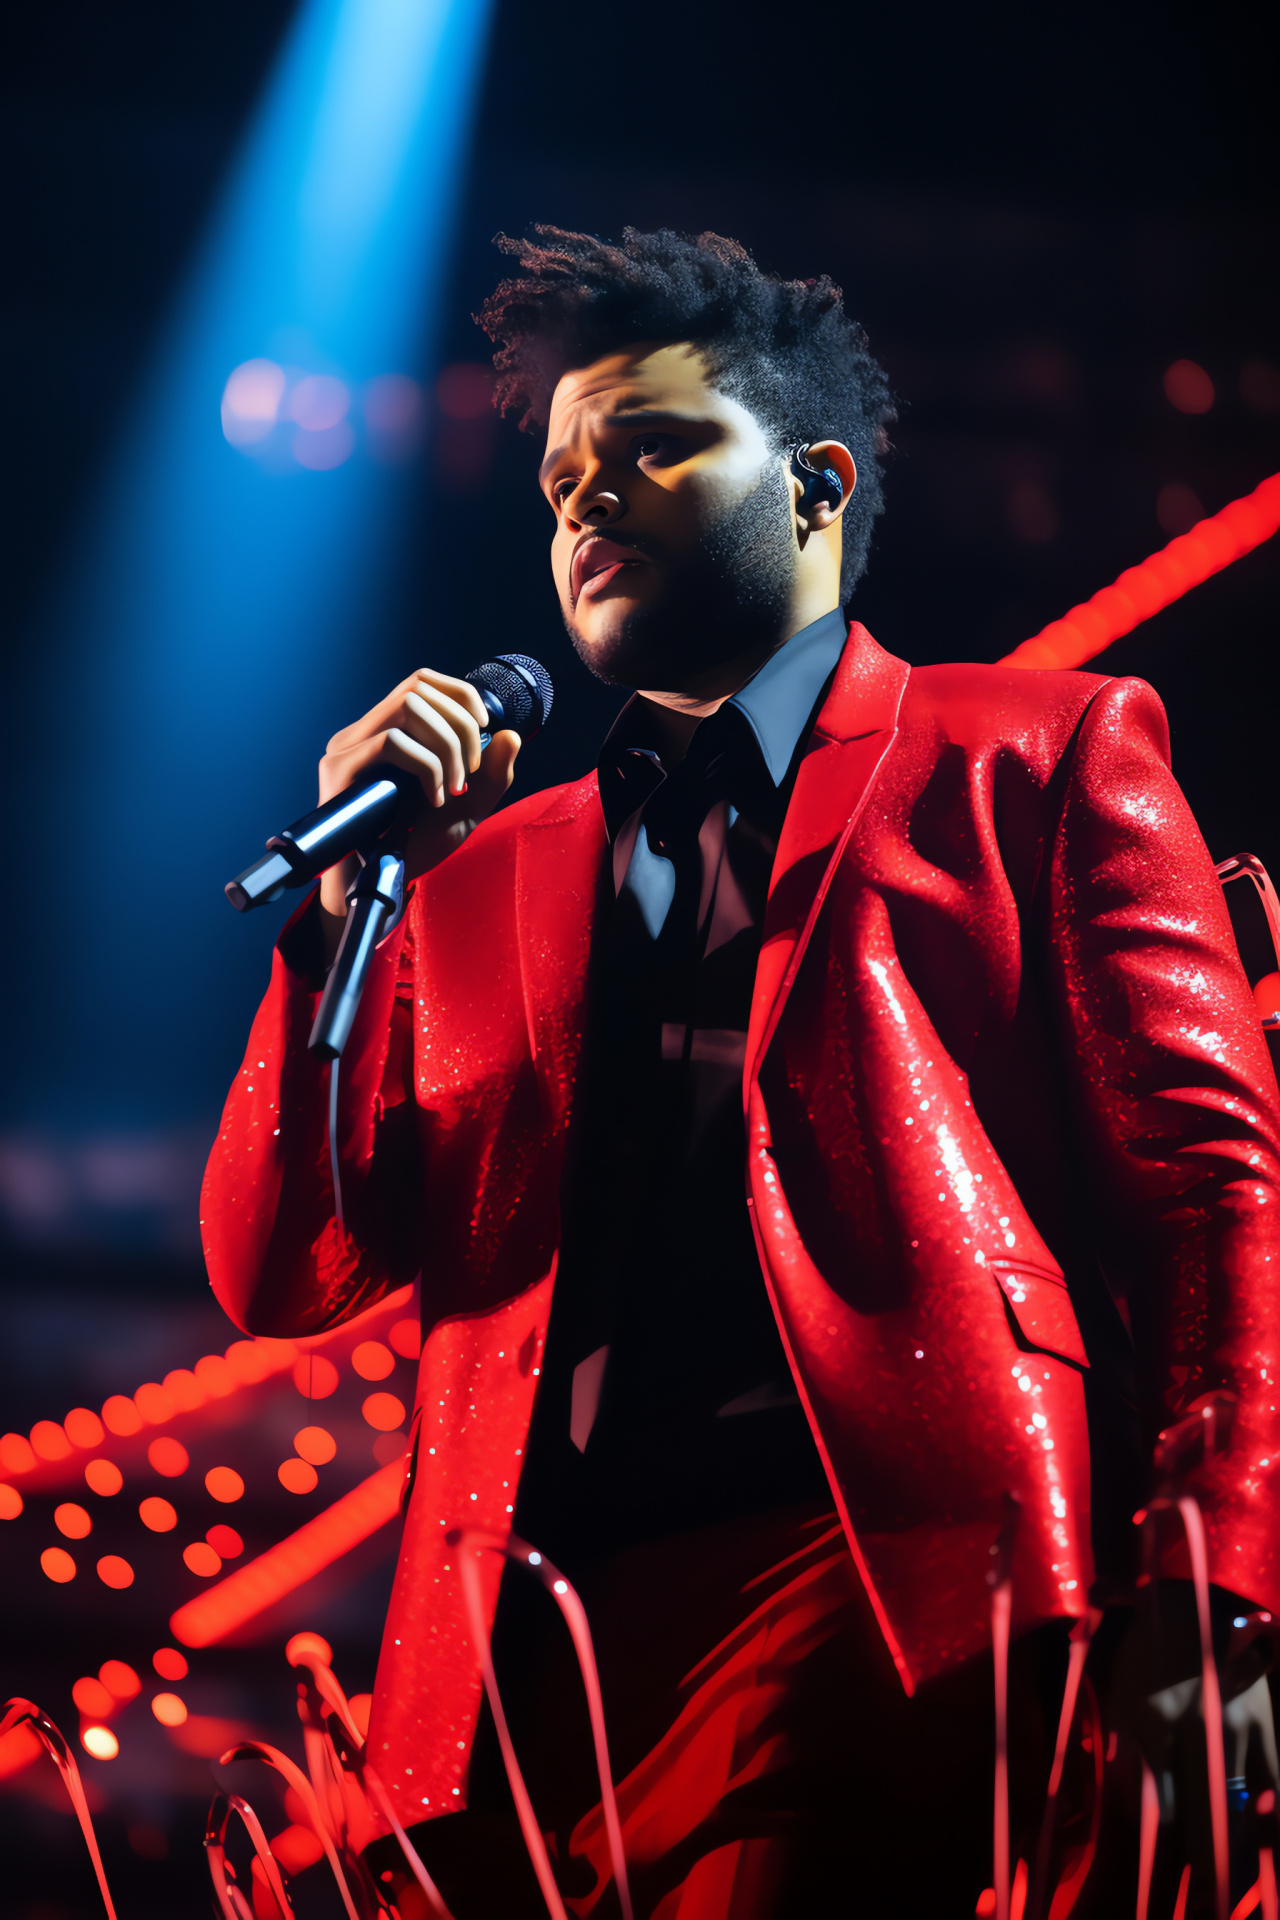 The Weeknd's Super Bowl showcase, captivating light display, iconic red performance suit, central with microphone, HD Phone Image